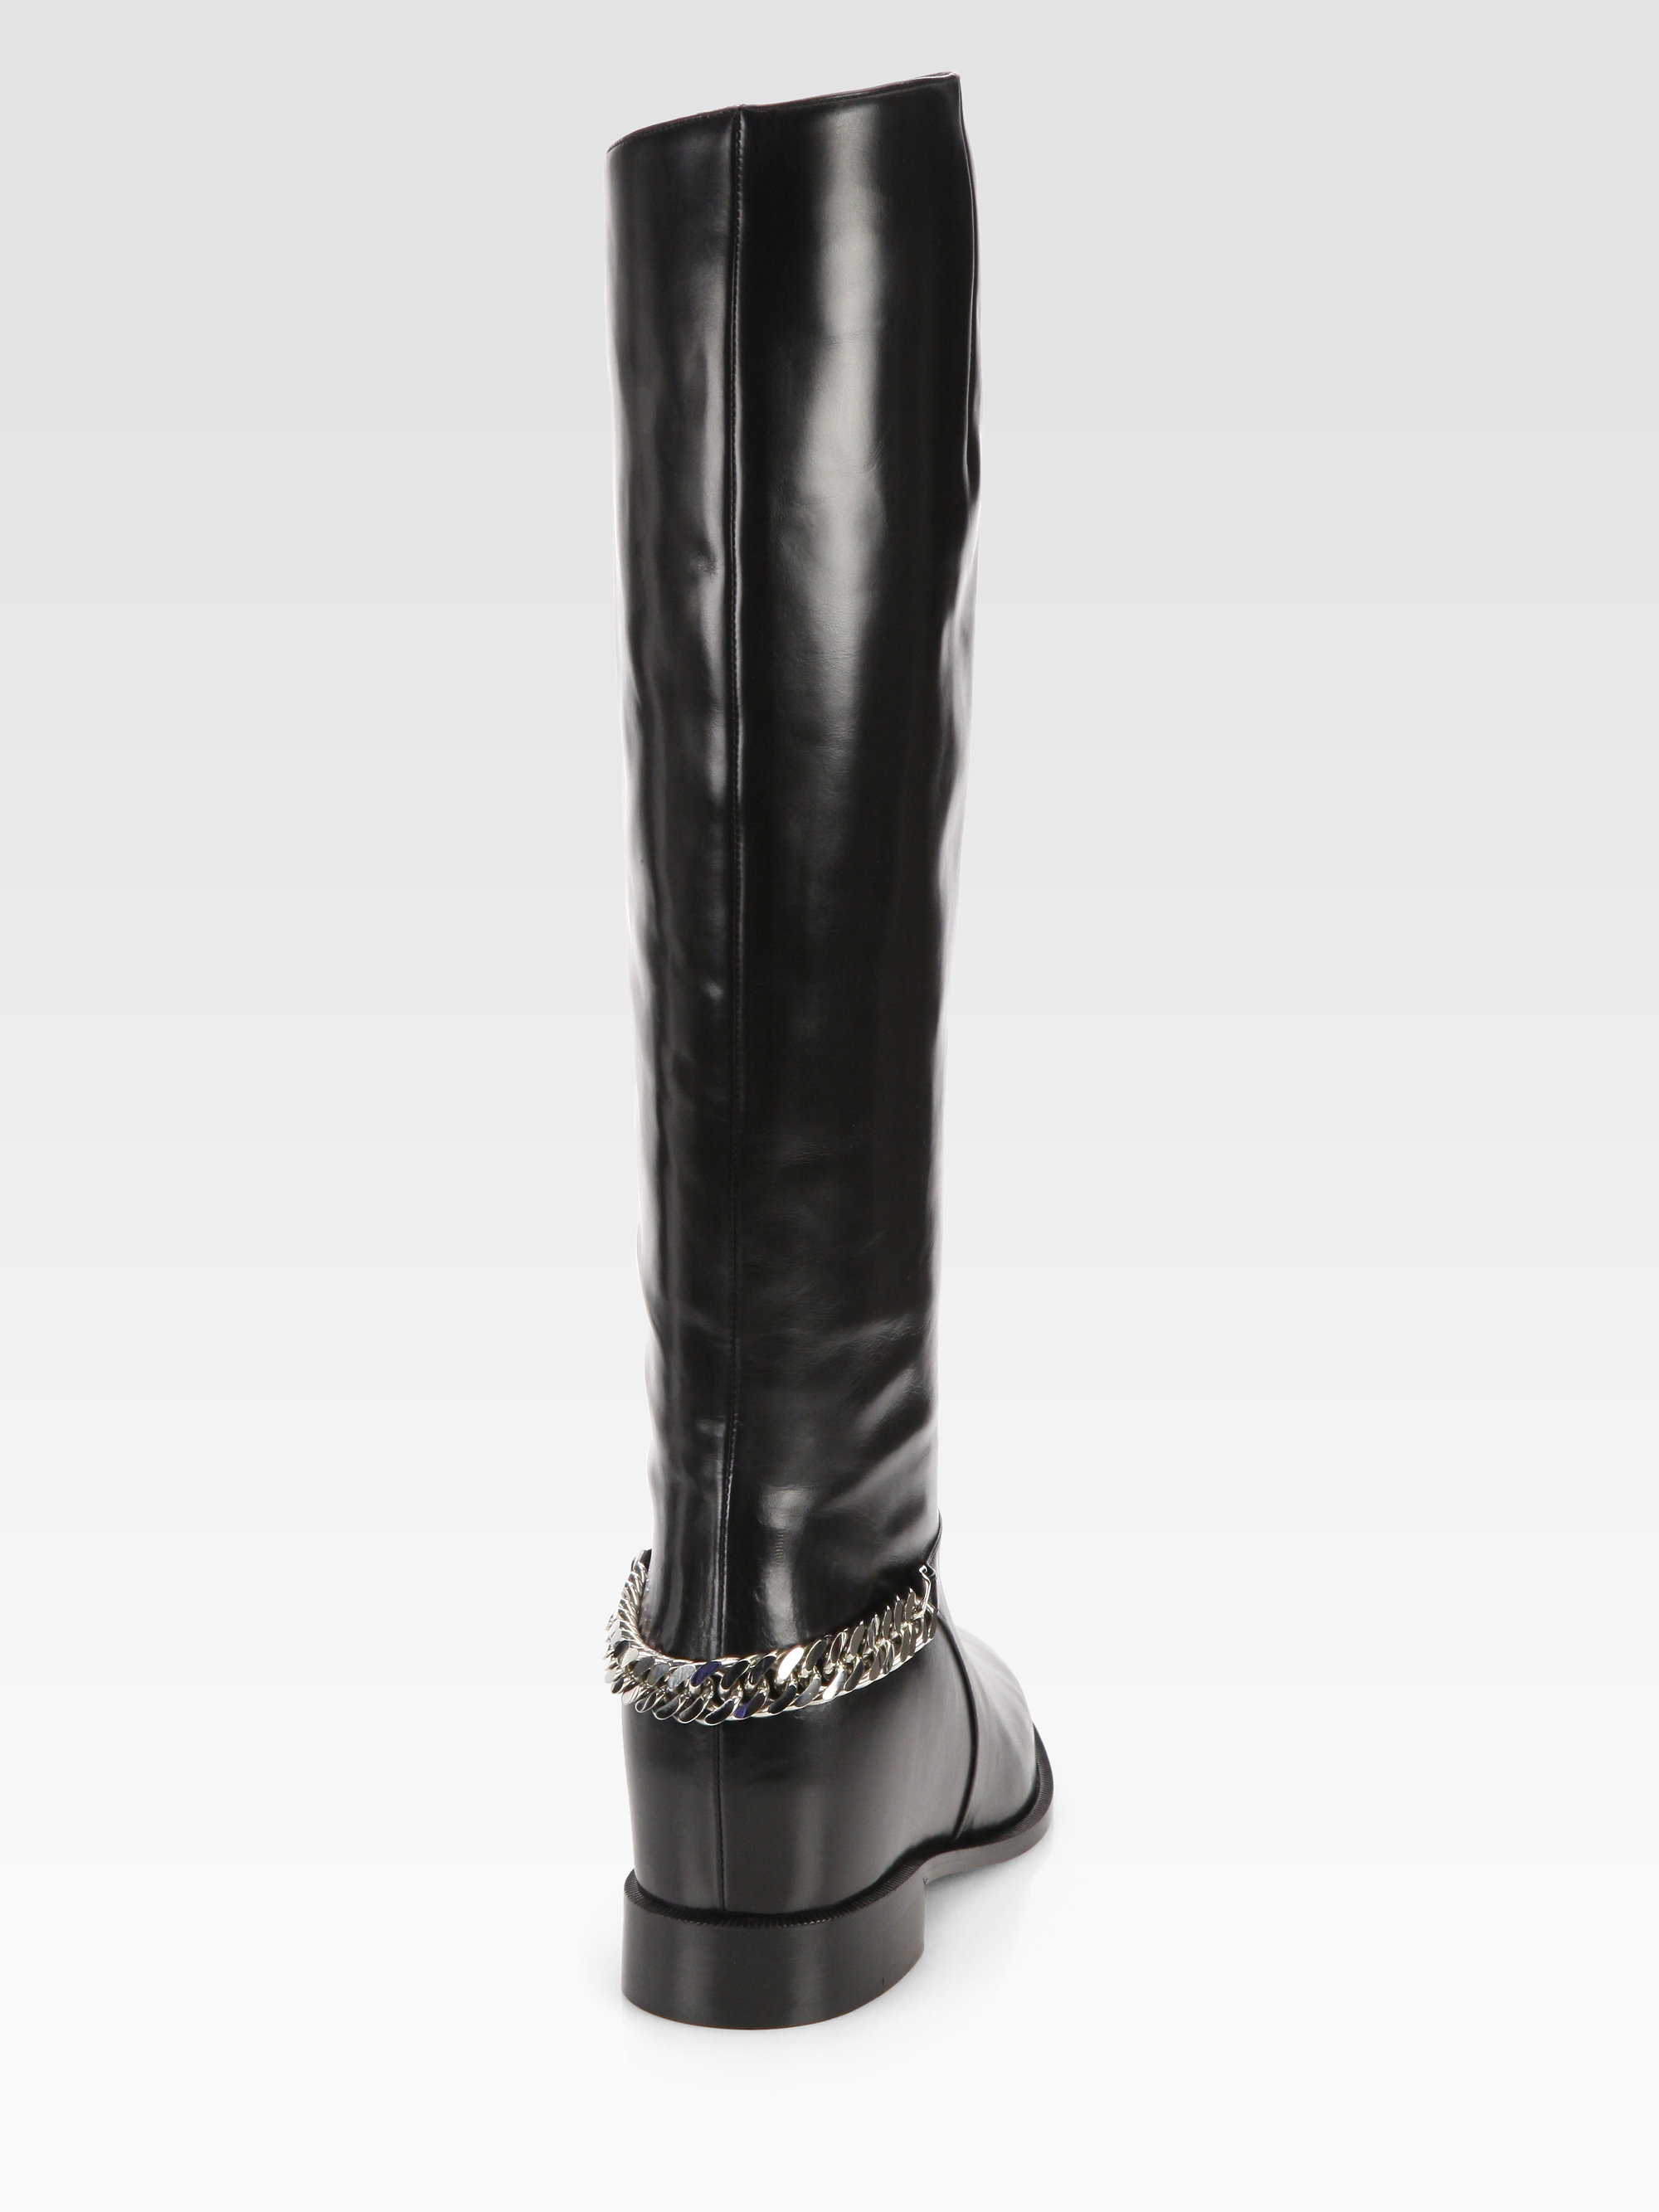 black spiked louis vuitton shoes - christian louboutin Cate knee-high boots | The Little Arts Academy